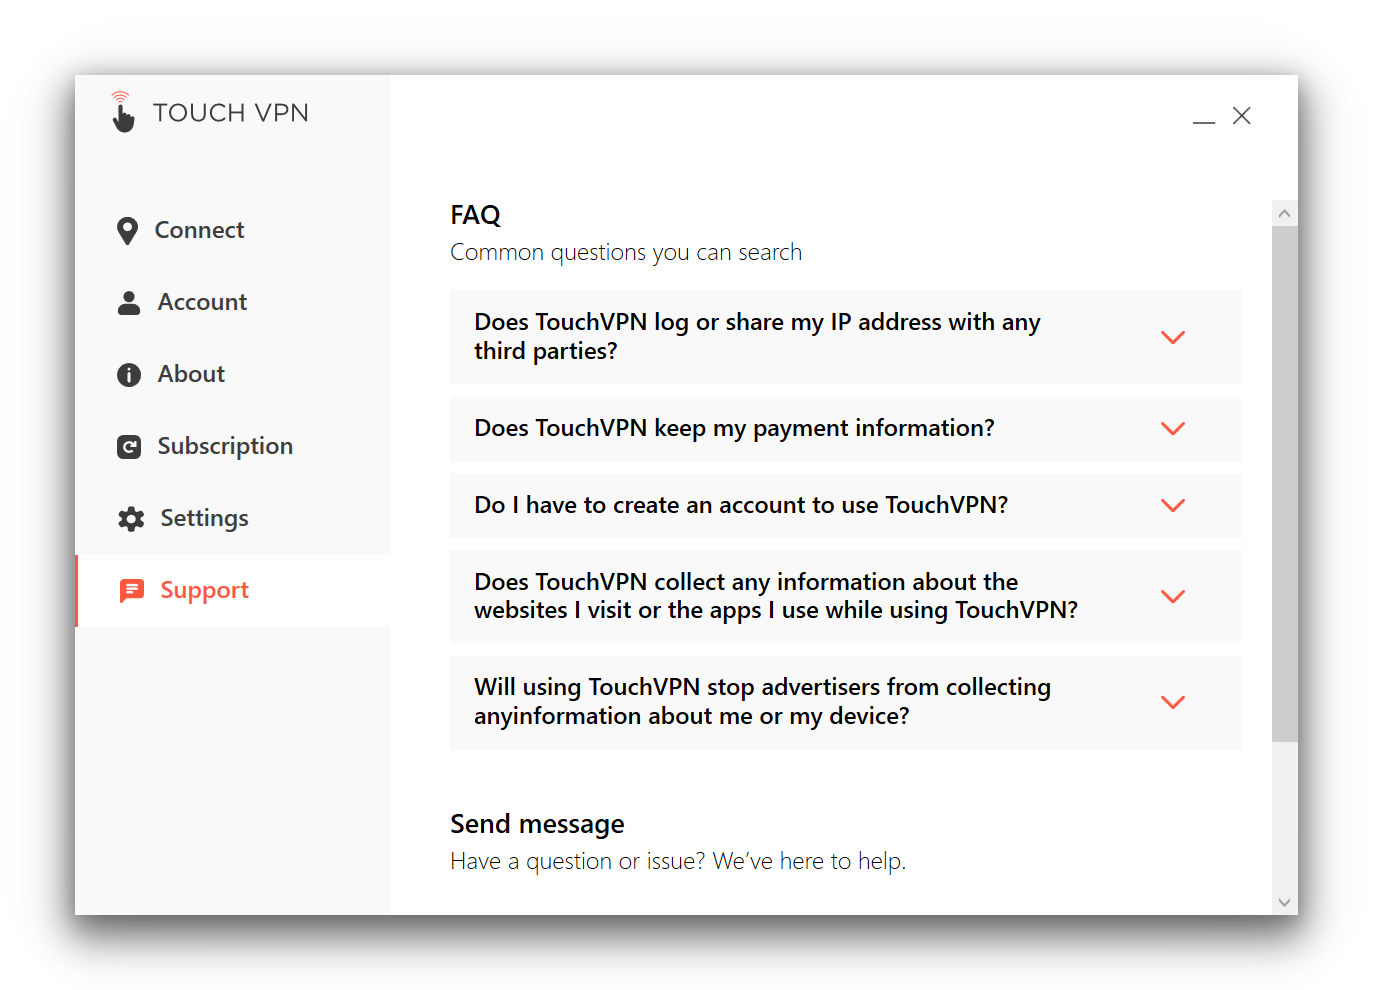 The support section on Touch VPN's Windows client